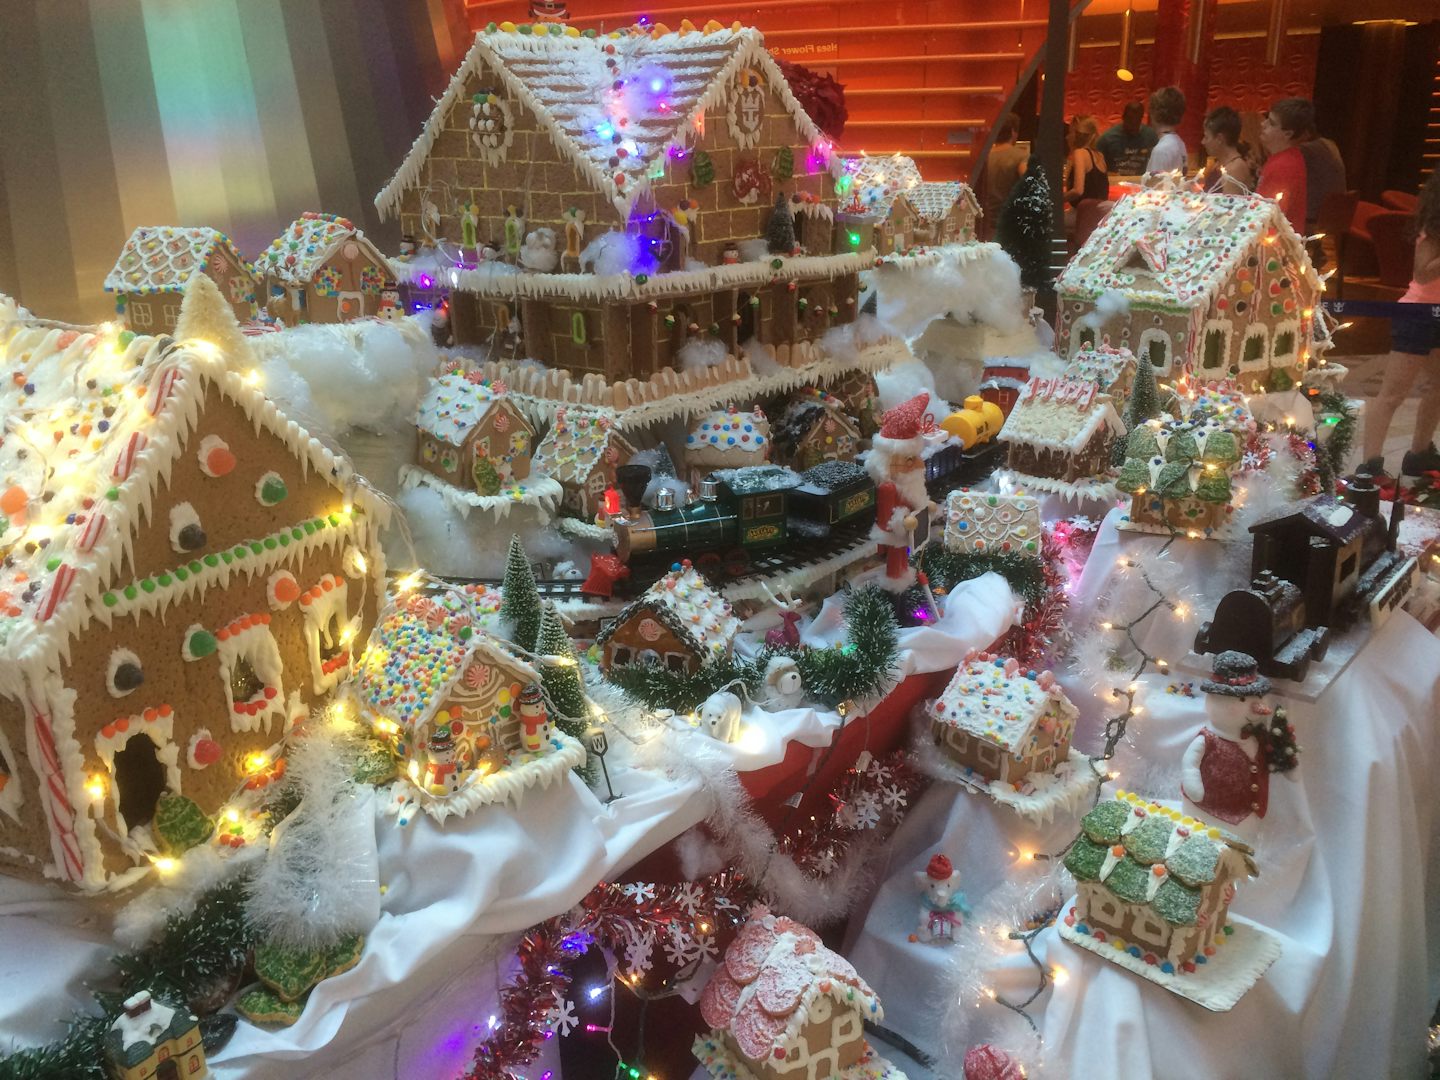 One of several gingerbread house displays on the holiday cruise.